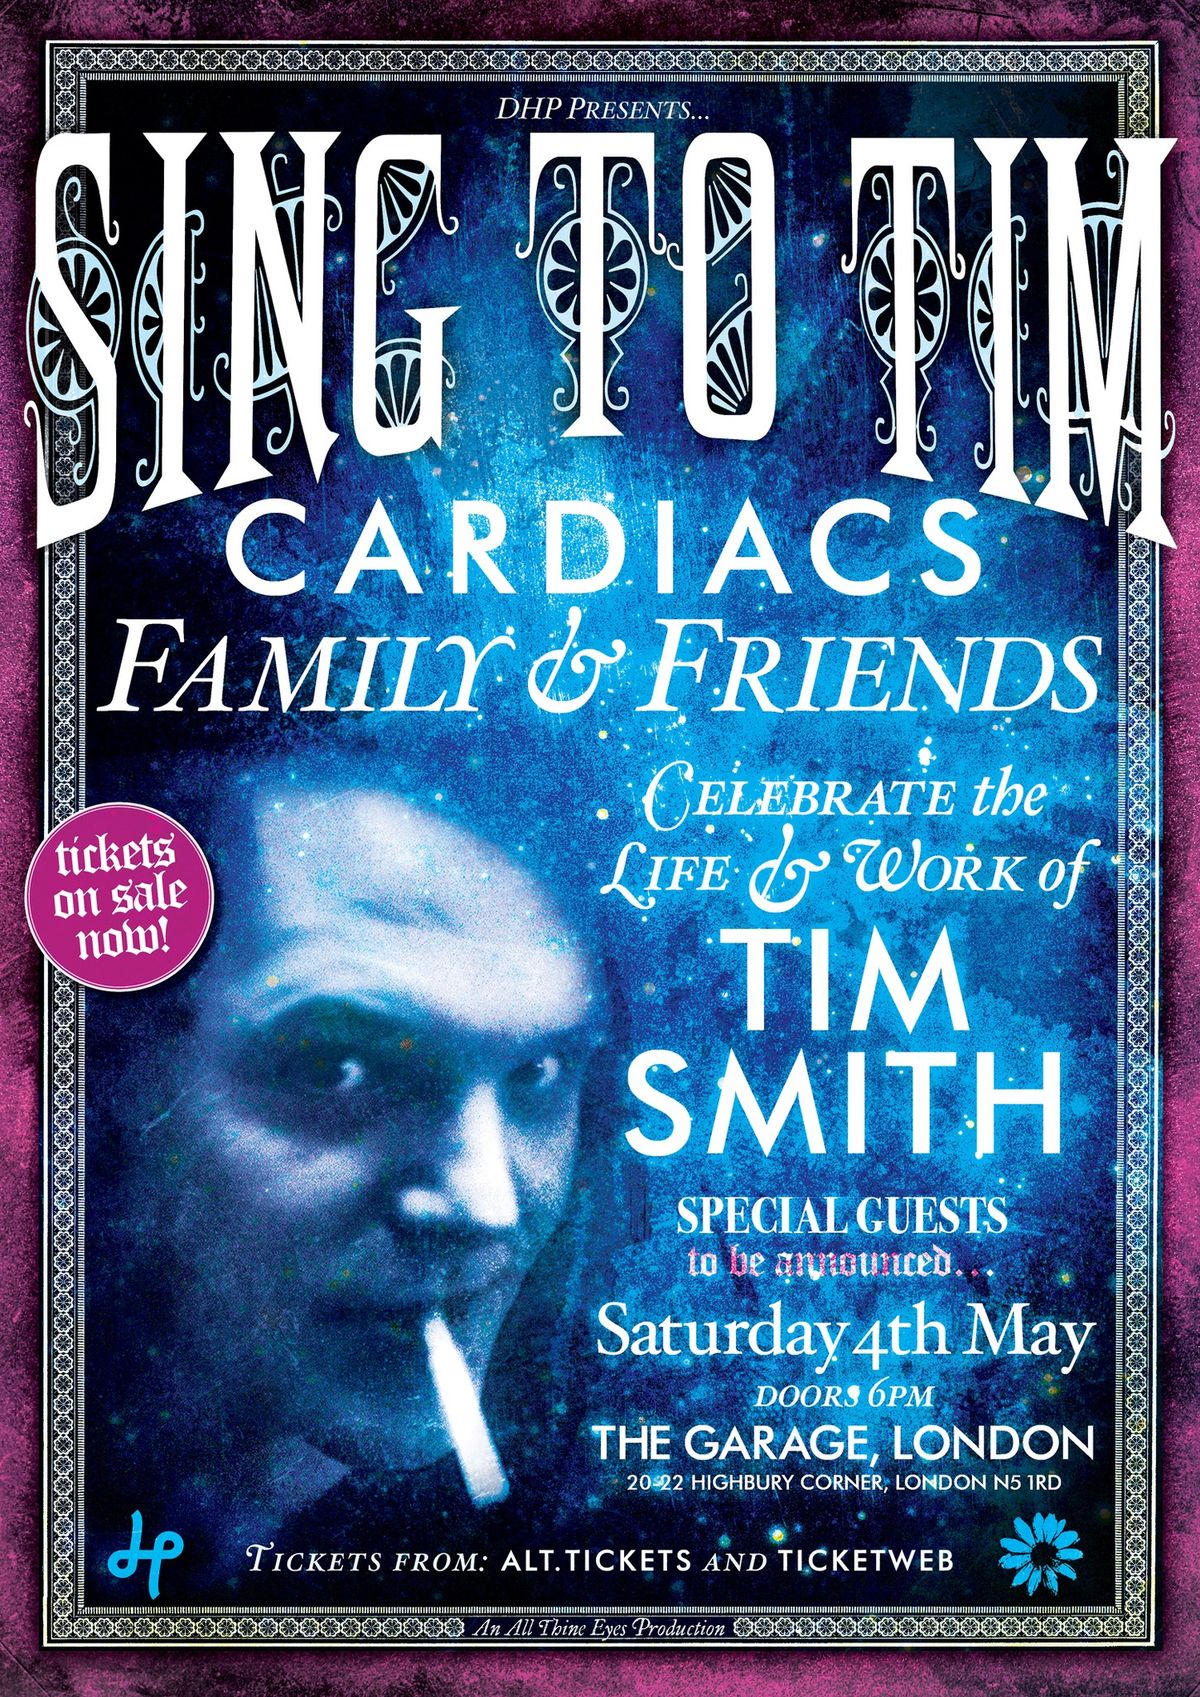 CARDIACS - Celebrate the music of Tim Smith live at The Garage, London